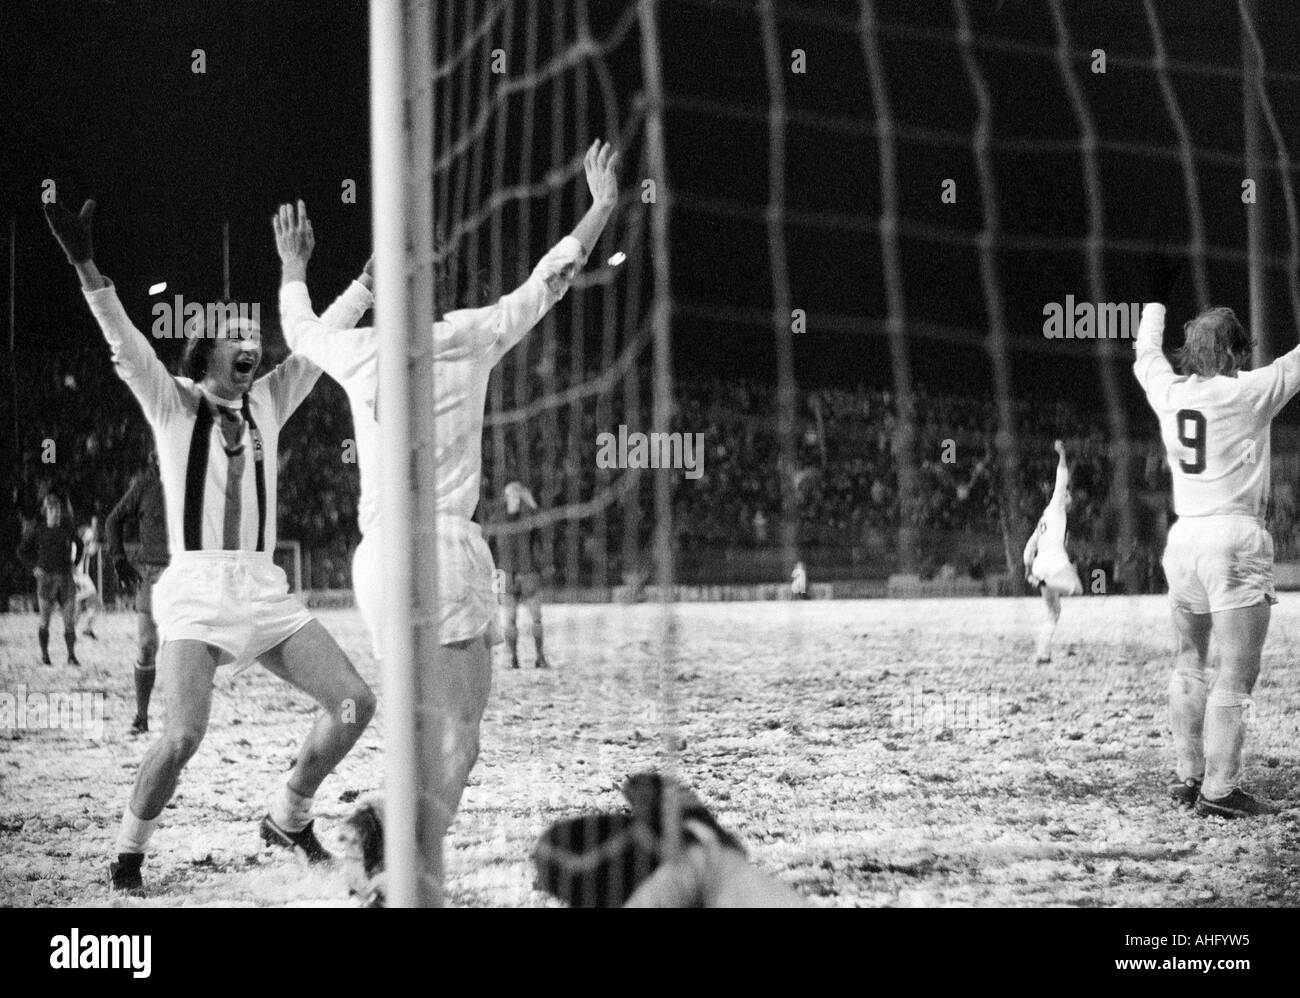 football, DFB Cup, eighth final, 1973/1974, Borussia Moenchengladbach versus Hamburger SV 2:2 after extra time, Boekelberg Stadium in Moenchengladbach, game on snow ground, rejoicing players, 2:2 equalizer goal to Gladbach by Christian Kulik (MG) covered Stock Photo